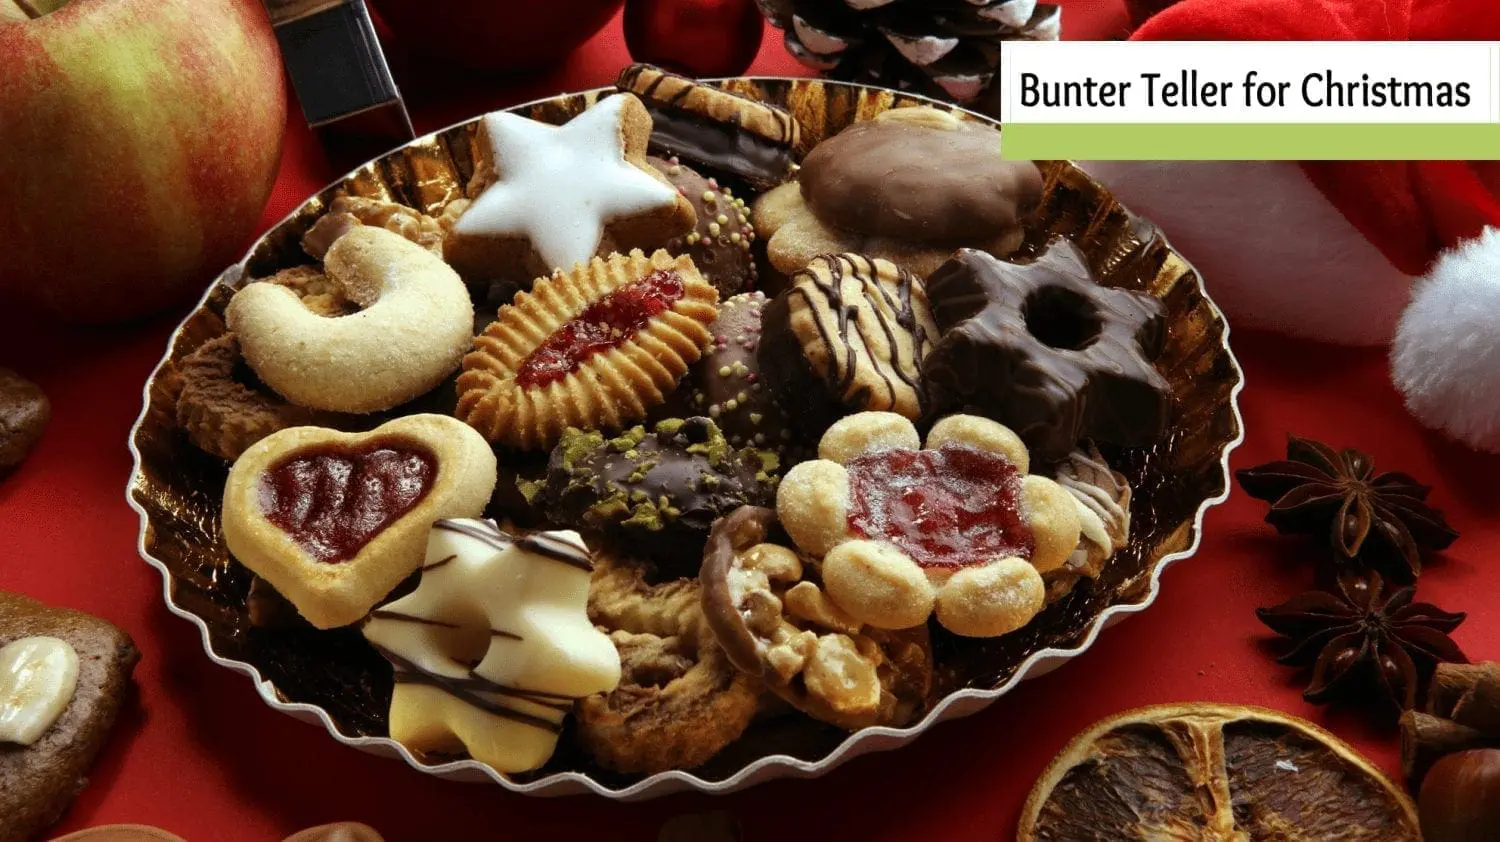 What is a Bunter Teller? A Plate of Christmas Cookies for Everyone!